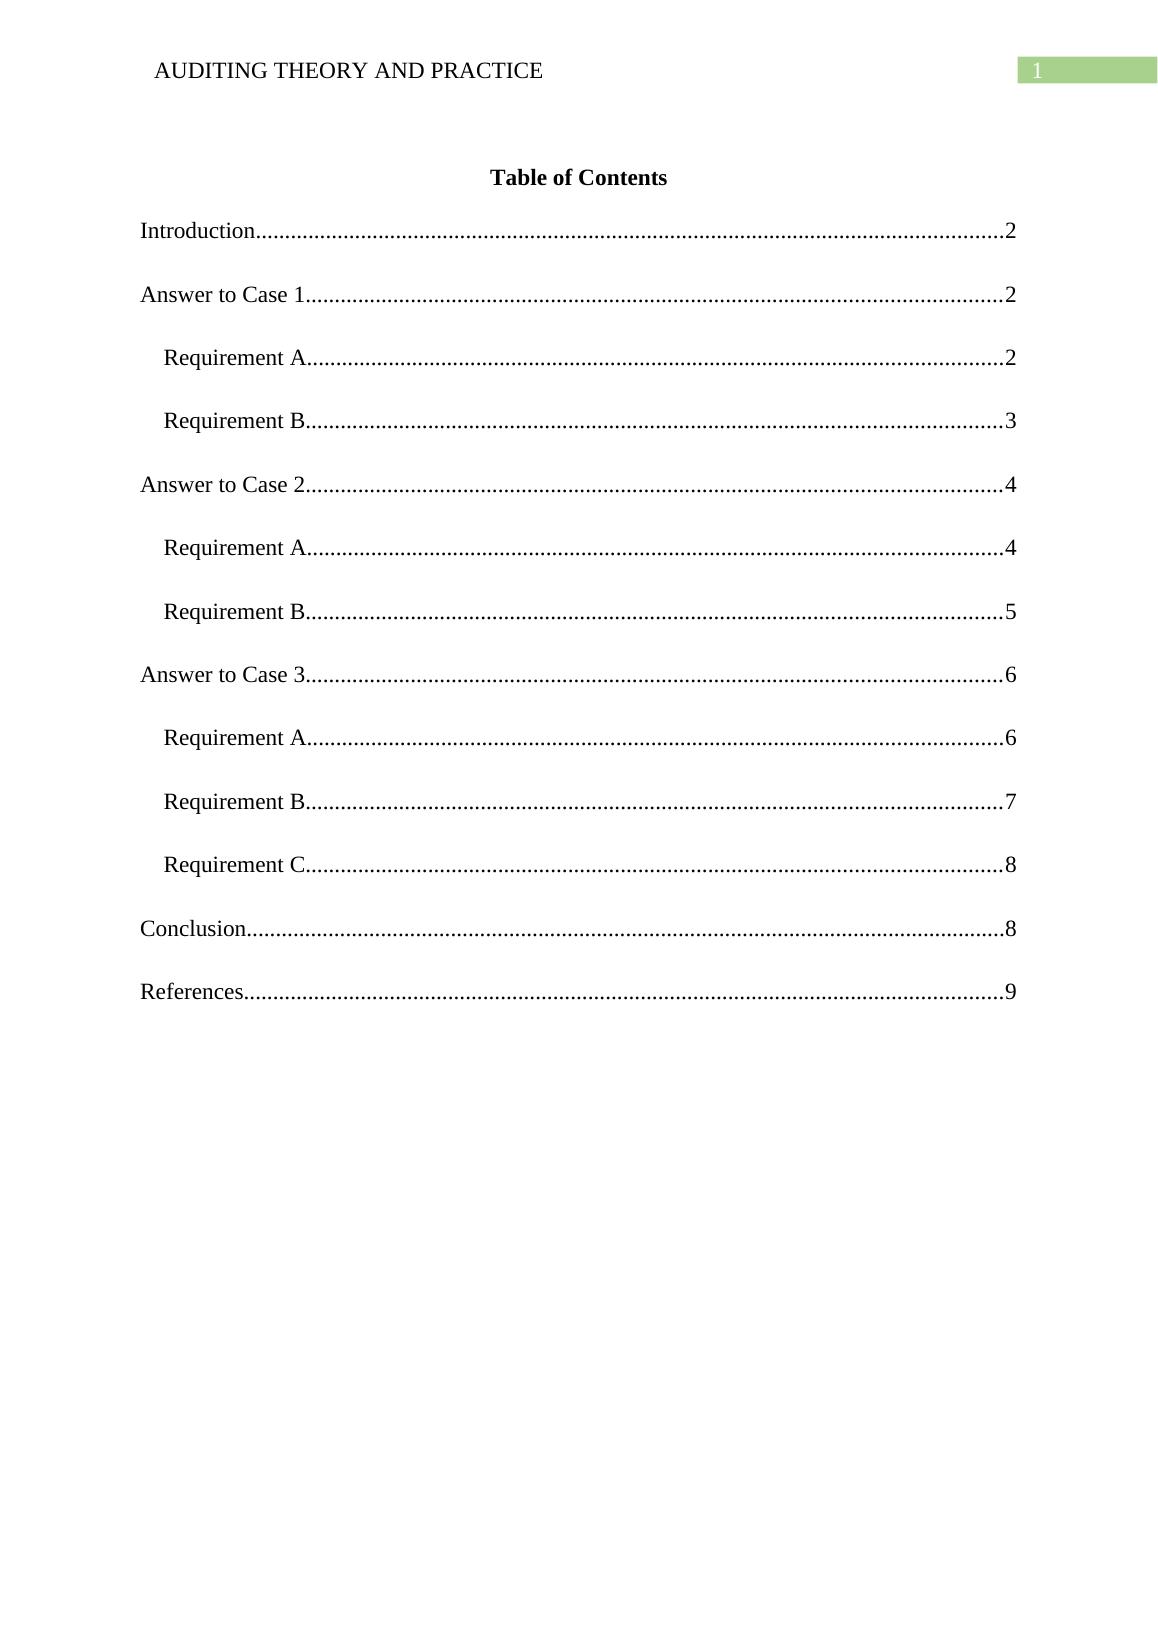 Auditing Theory And Practice Assignment Report_2